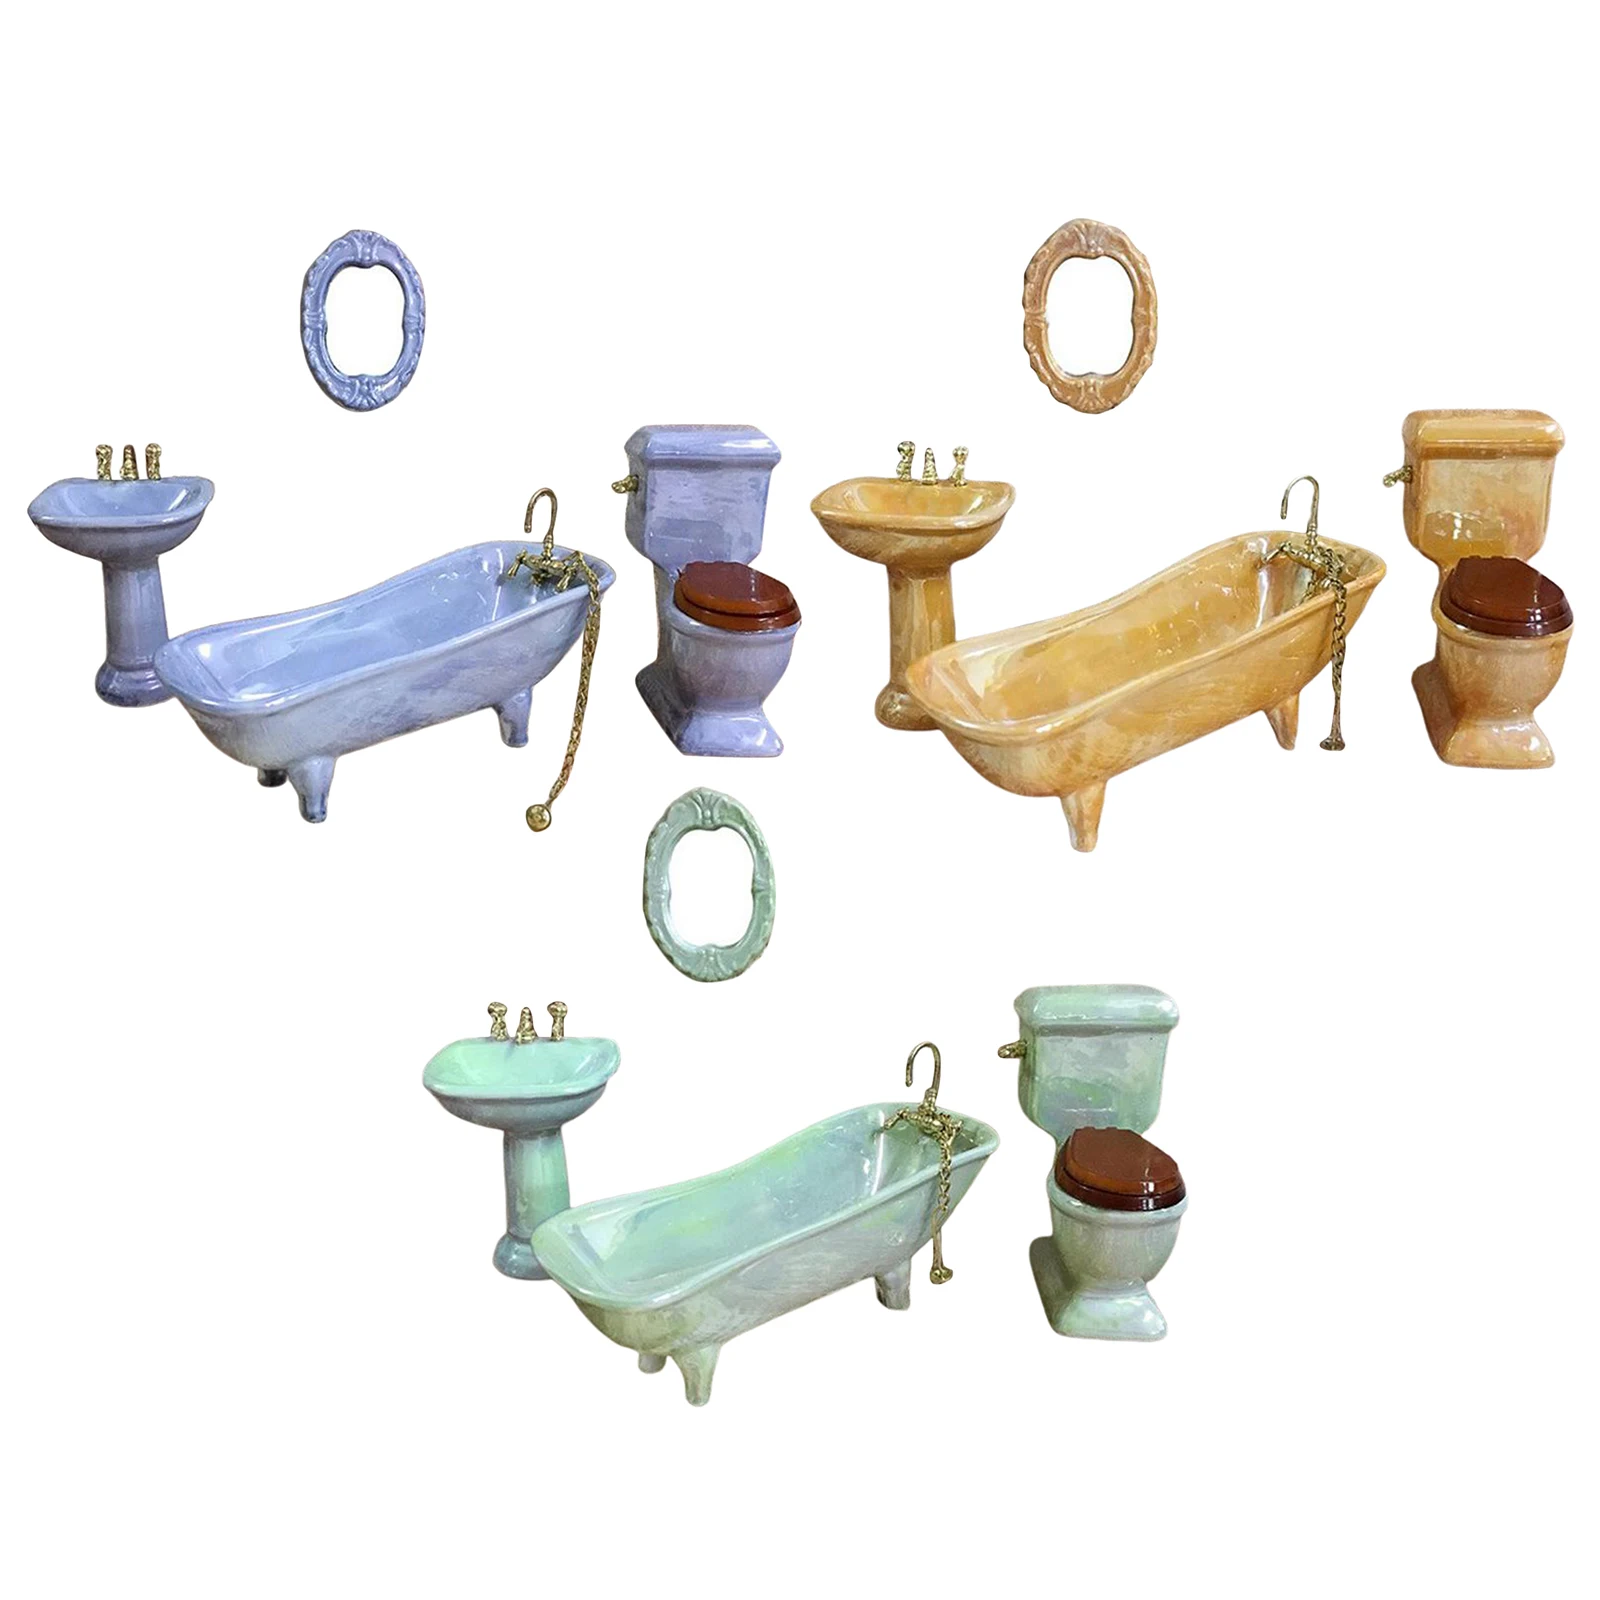 Bathroom Dolls House Accessories Play Set for Dolls Houses, Dollhouse Bathroom Furniture Set 4pcs